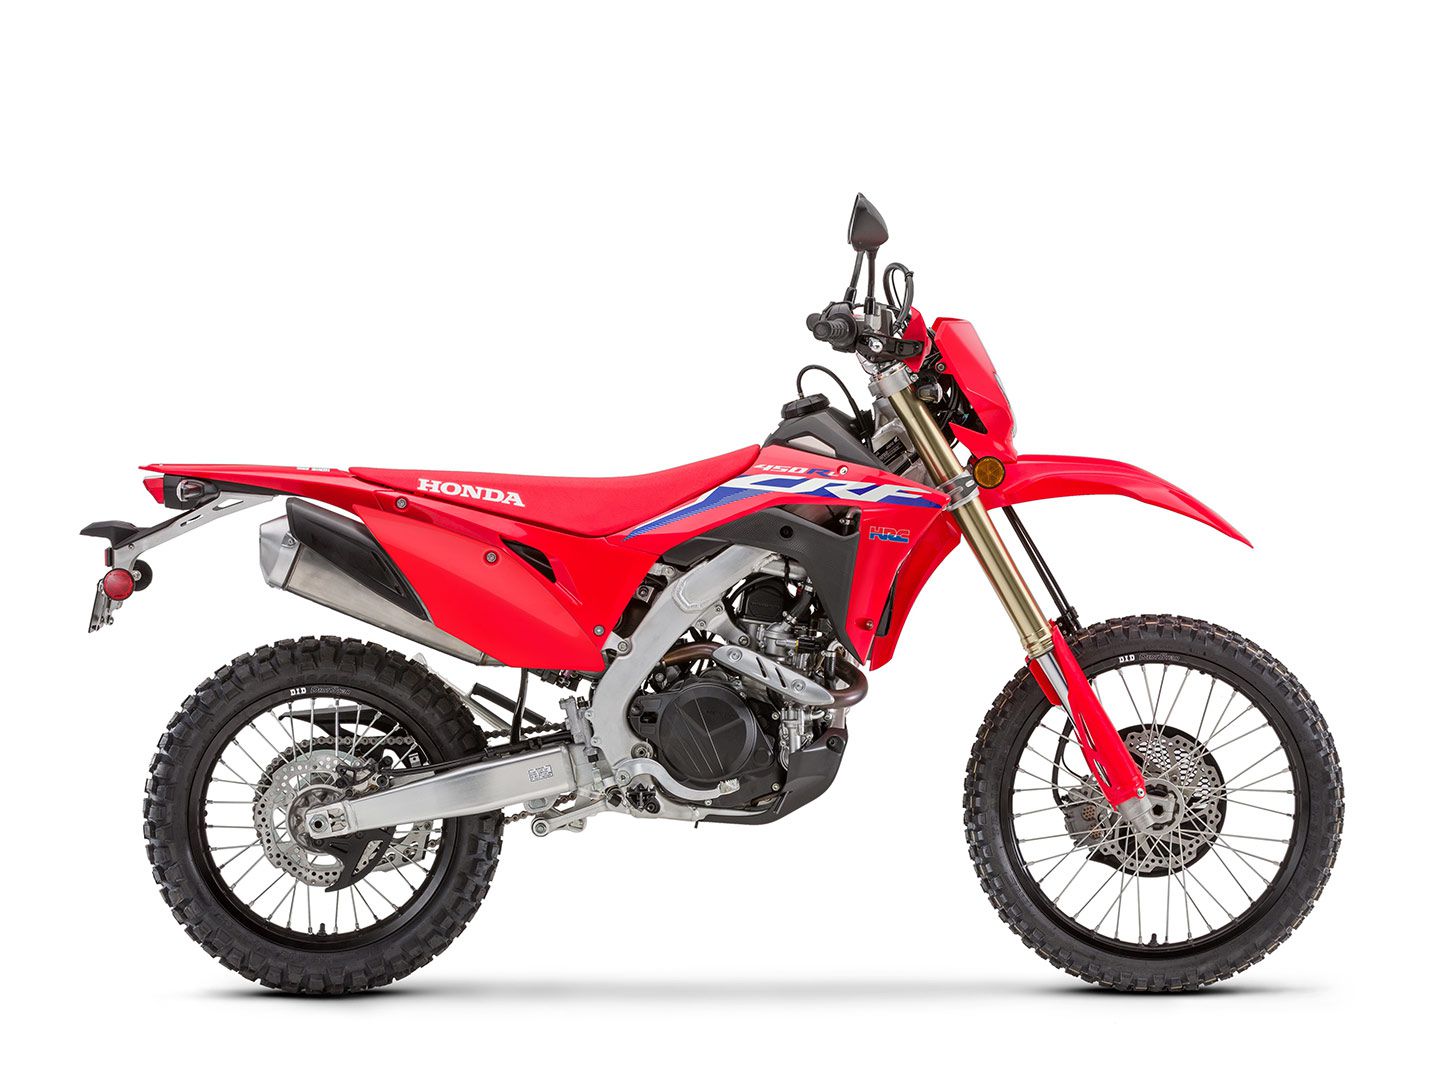 The Honda CRF450L is a highly competent, off-road-biased dual sport.